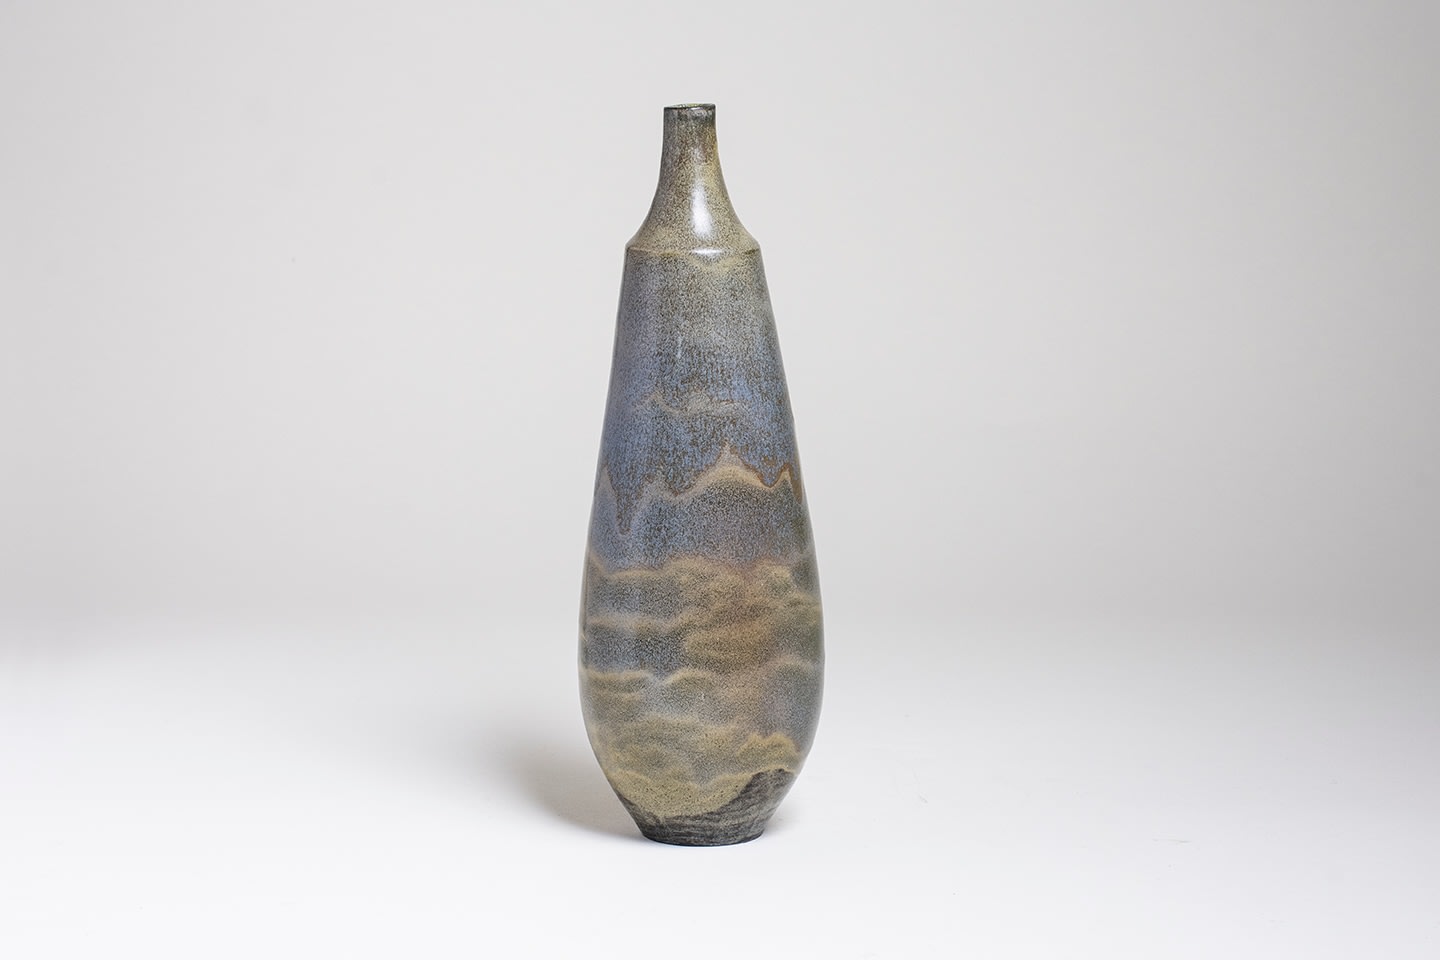 a tall thin bottle form vase by gertrud and otto natzler, the simple form accented by the glaze, a dripping gray blue Mariposa reduction fired glaze